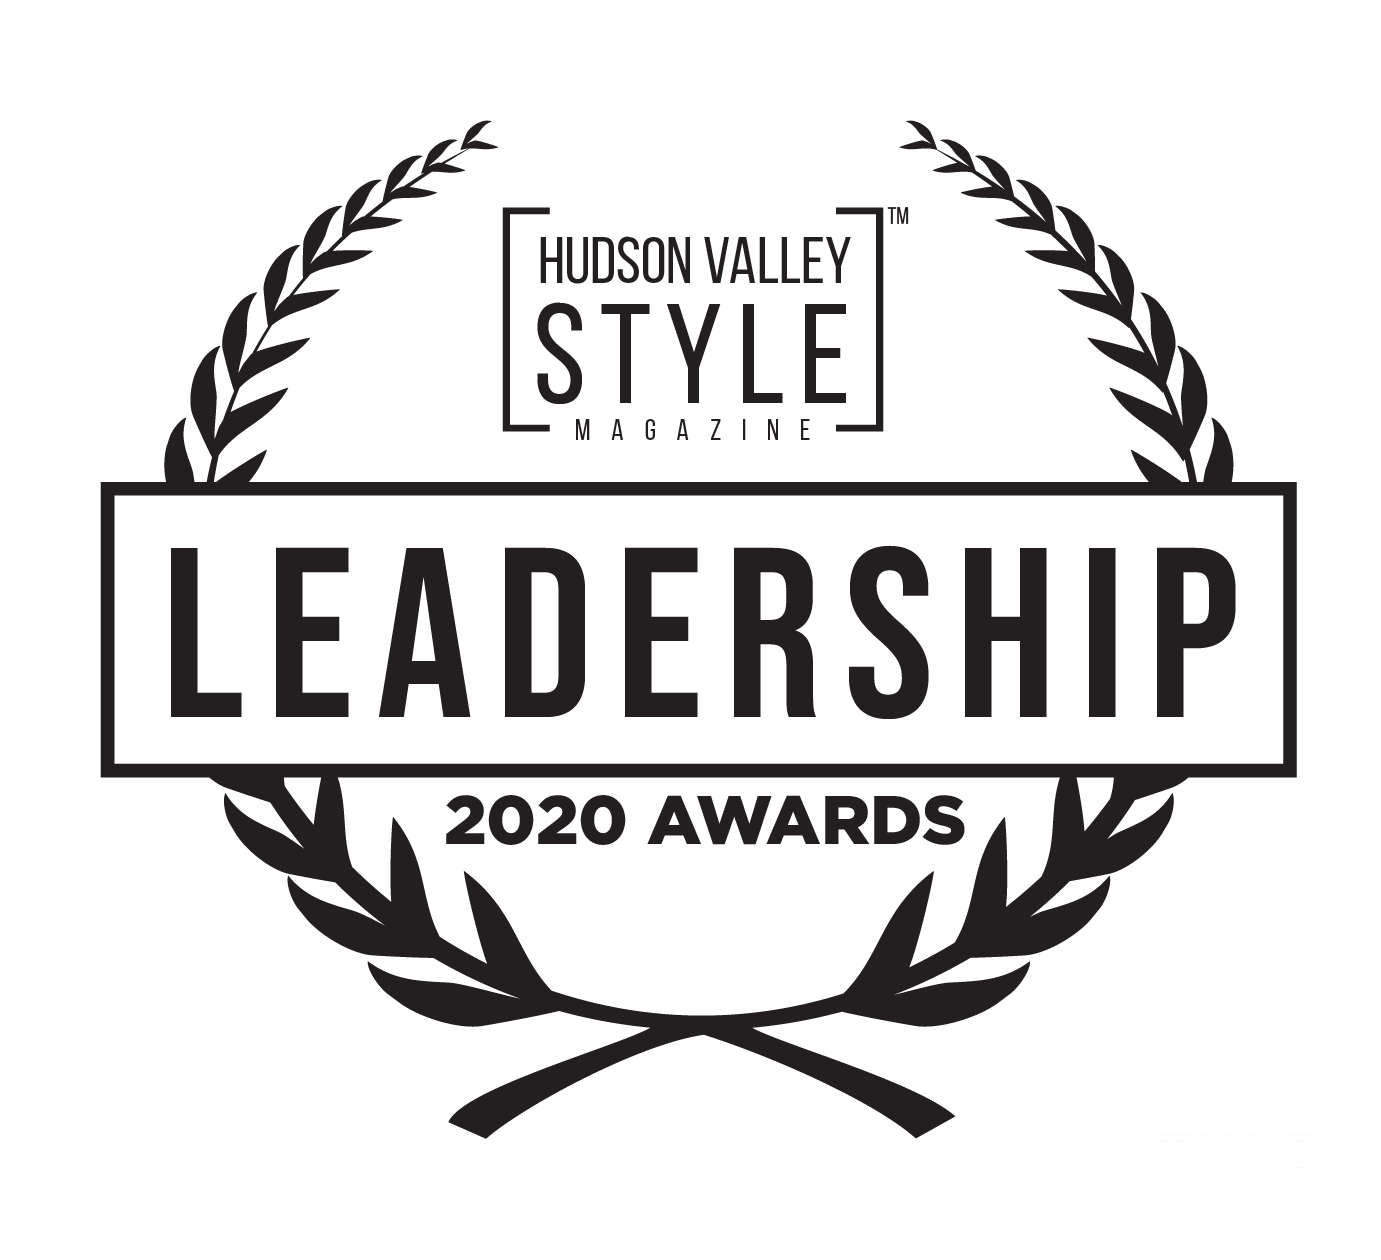 Hudson Valley Style Magazine 2020 Awards: Recognizing Outstanding Style, Design, Creativity, Innovation and Leadership Achievements while advancing Sustainable Design and Social Responsibility Principles in the Greater Hudson Valley Region and all around the World.